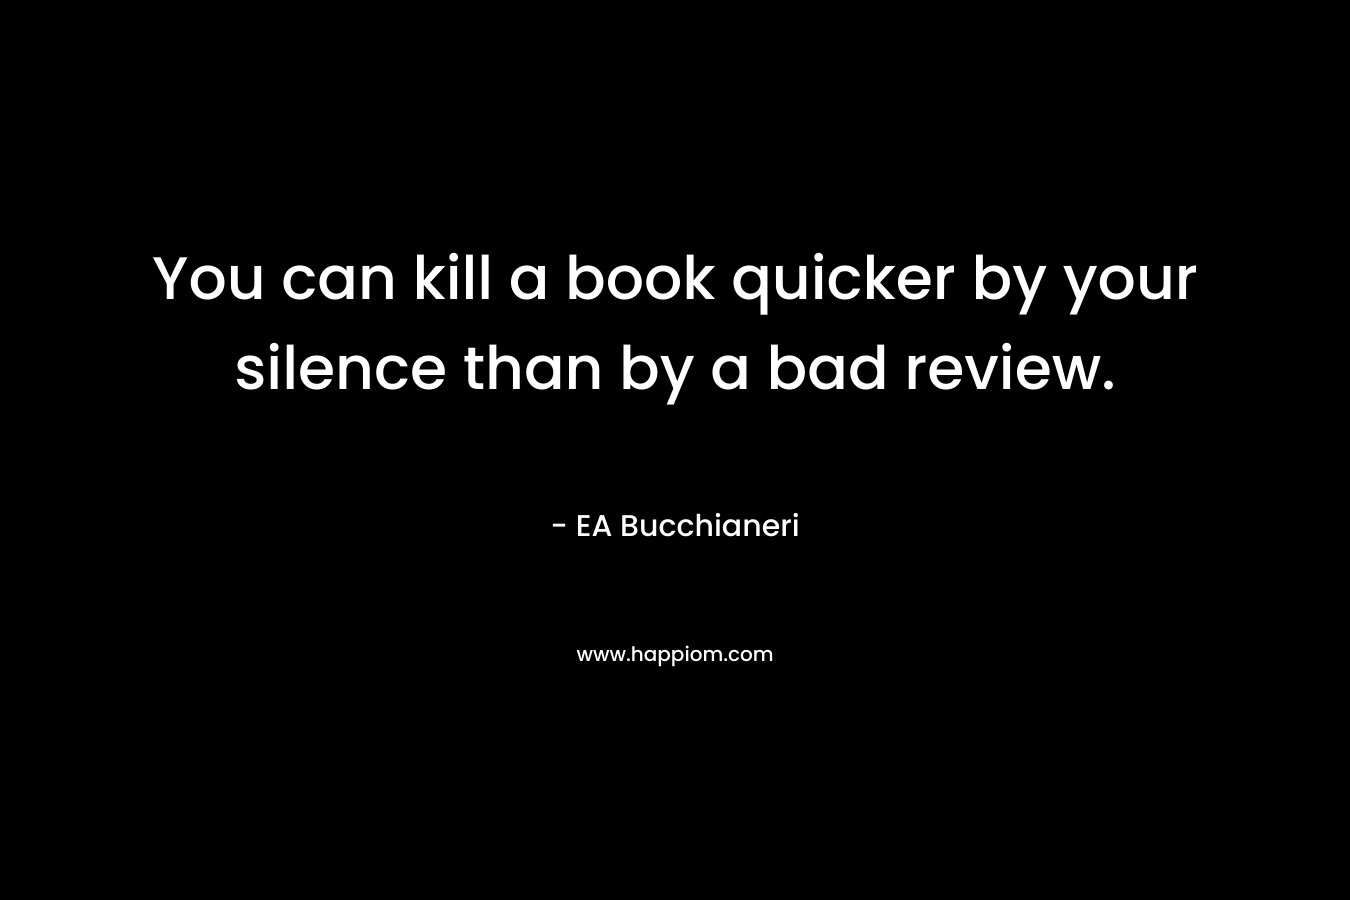 You can kill a book quicker by your silence than by a bad review. – EA Bucchianeri